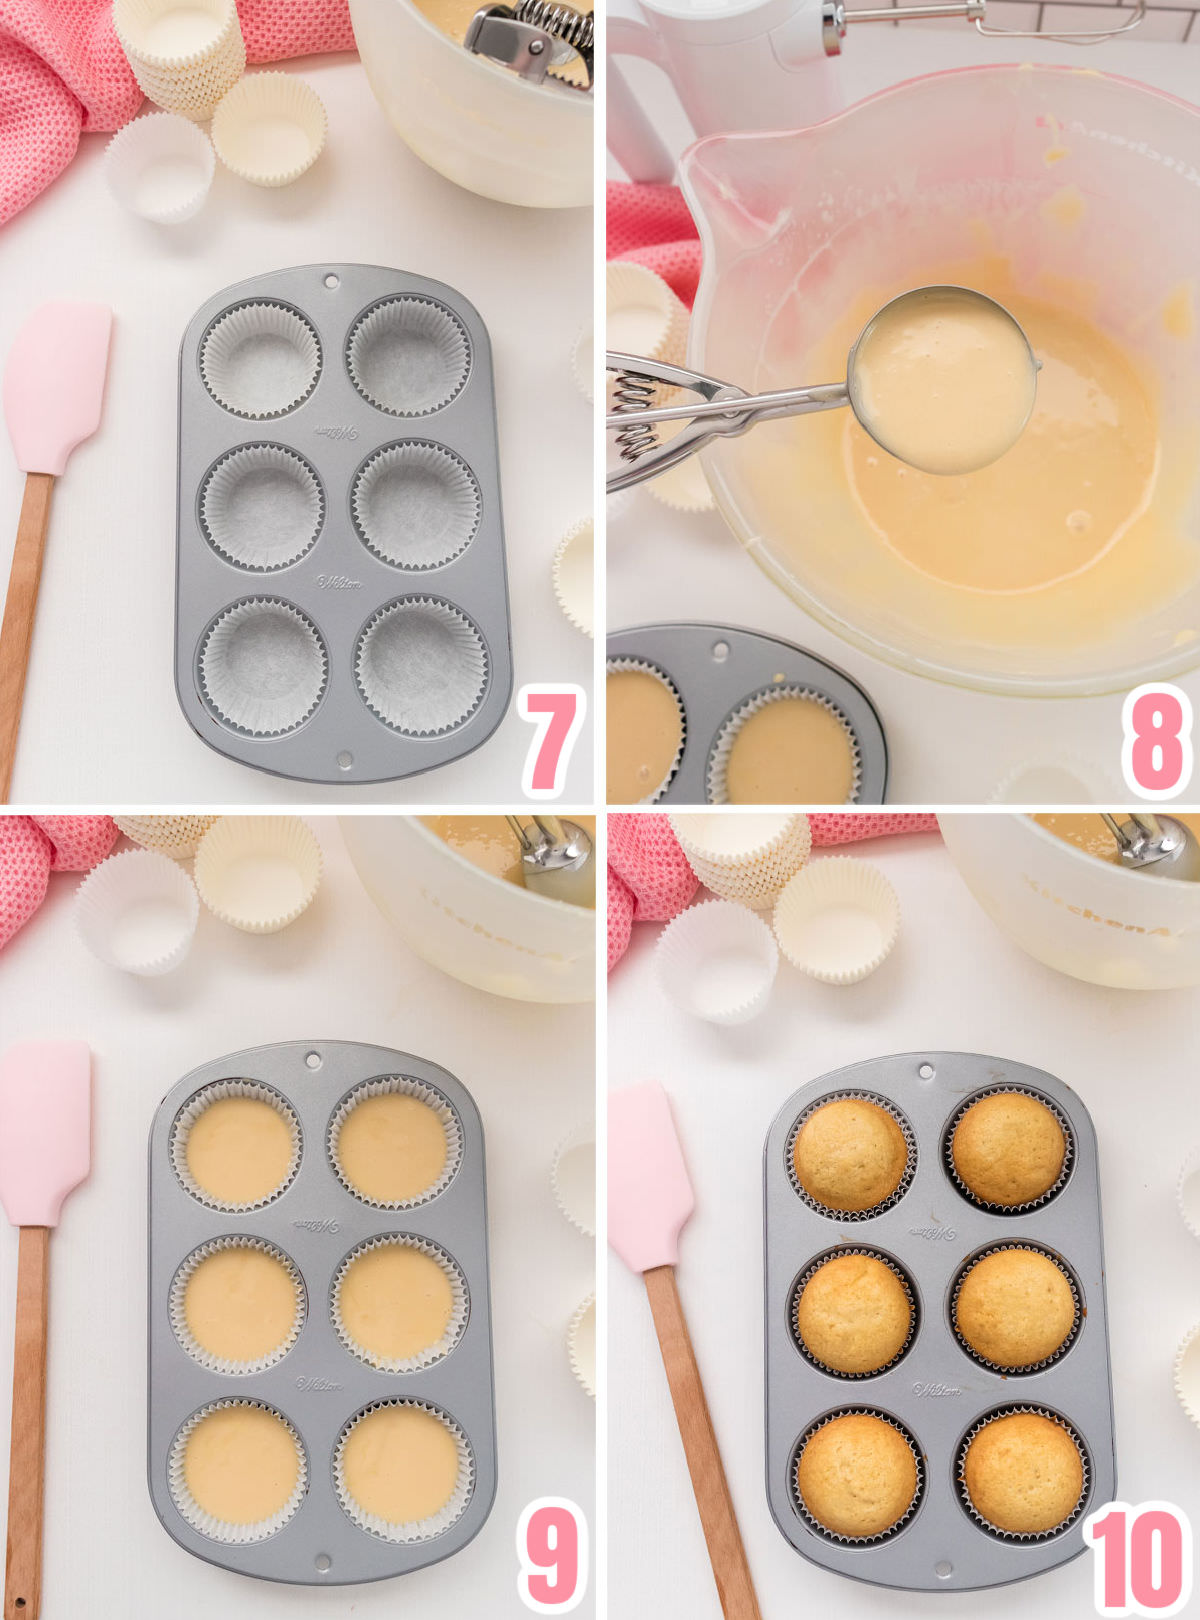 Collage image showing the steps for baking the Homemade Vanilla Cupcakes.